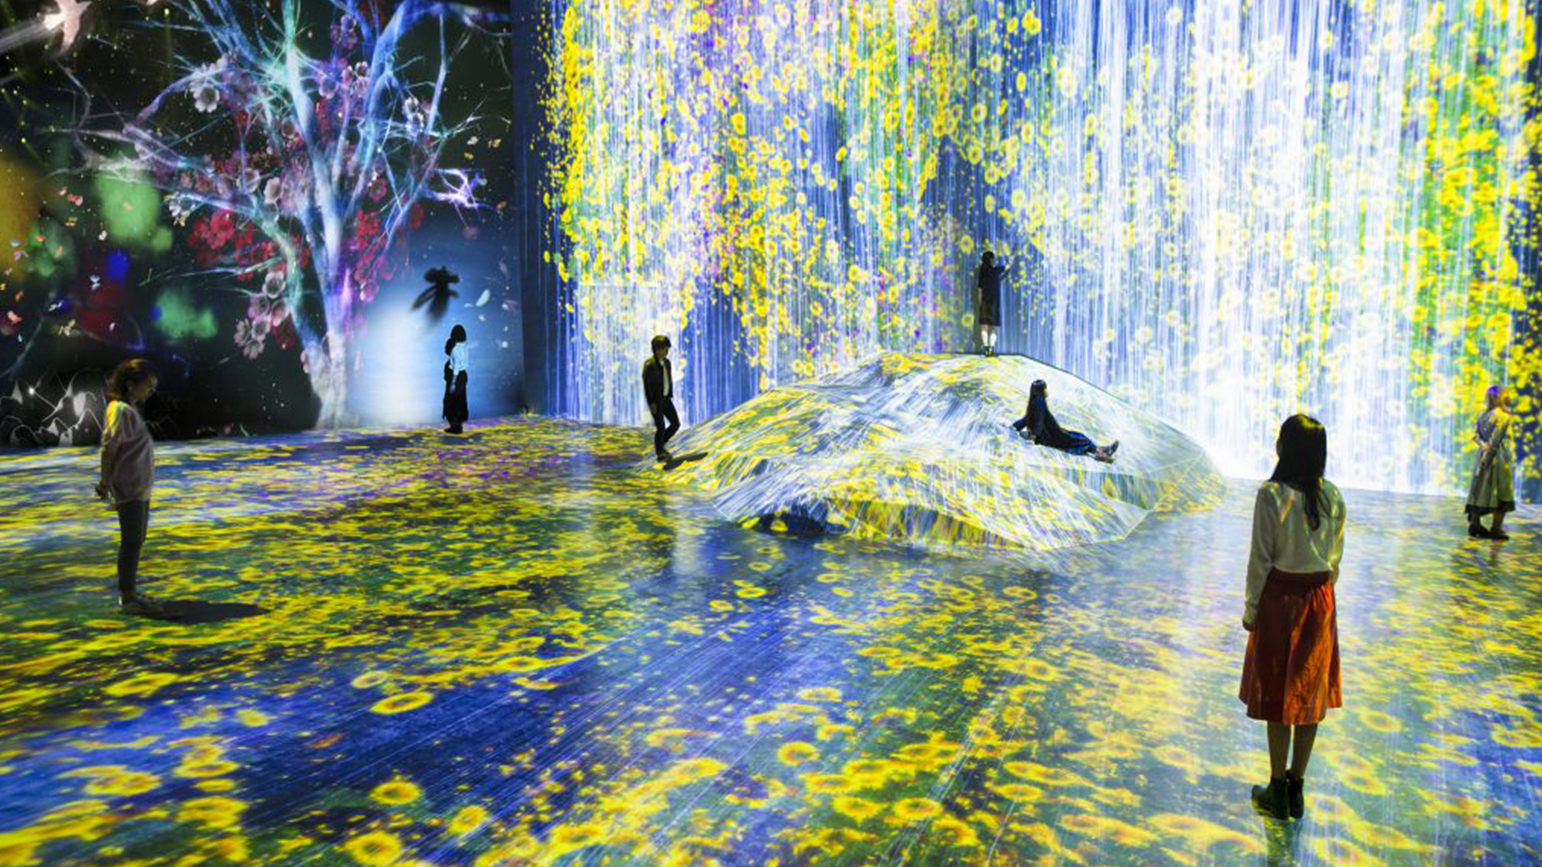 Project by teamLab